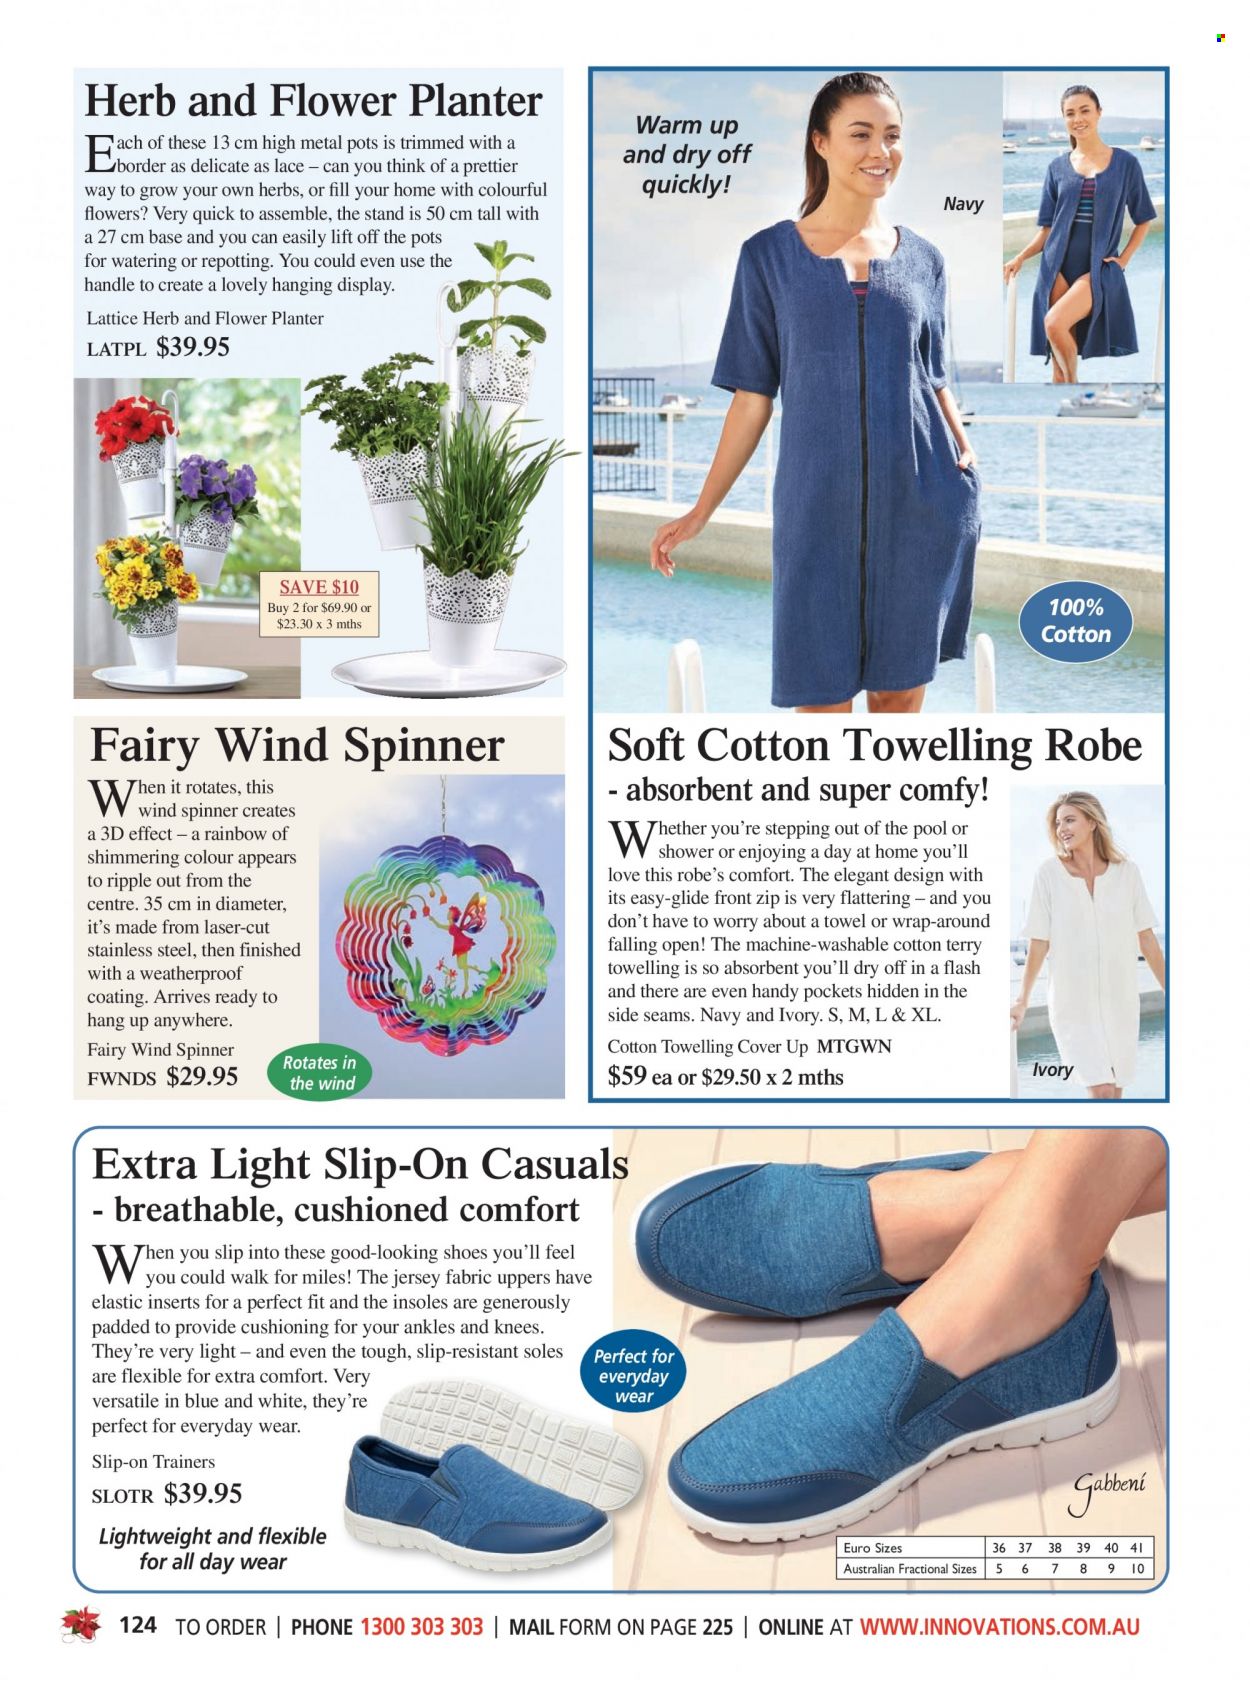 thumbnail - Innovations Catalogue - Sales products - shoes, slip-on shoes, trainers, pot, towel, robe. Page 124.